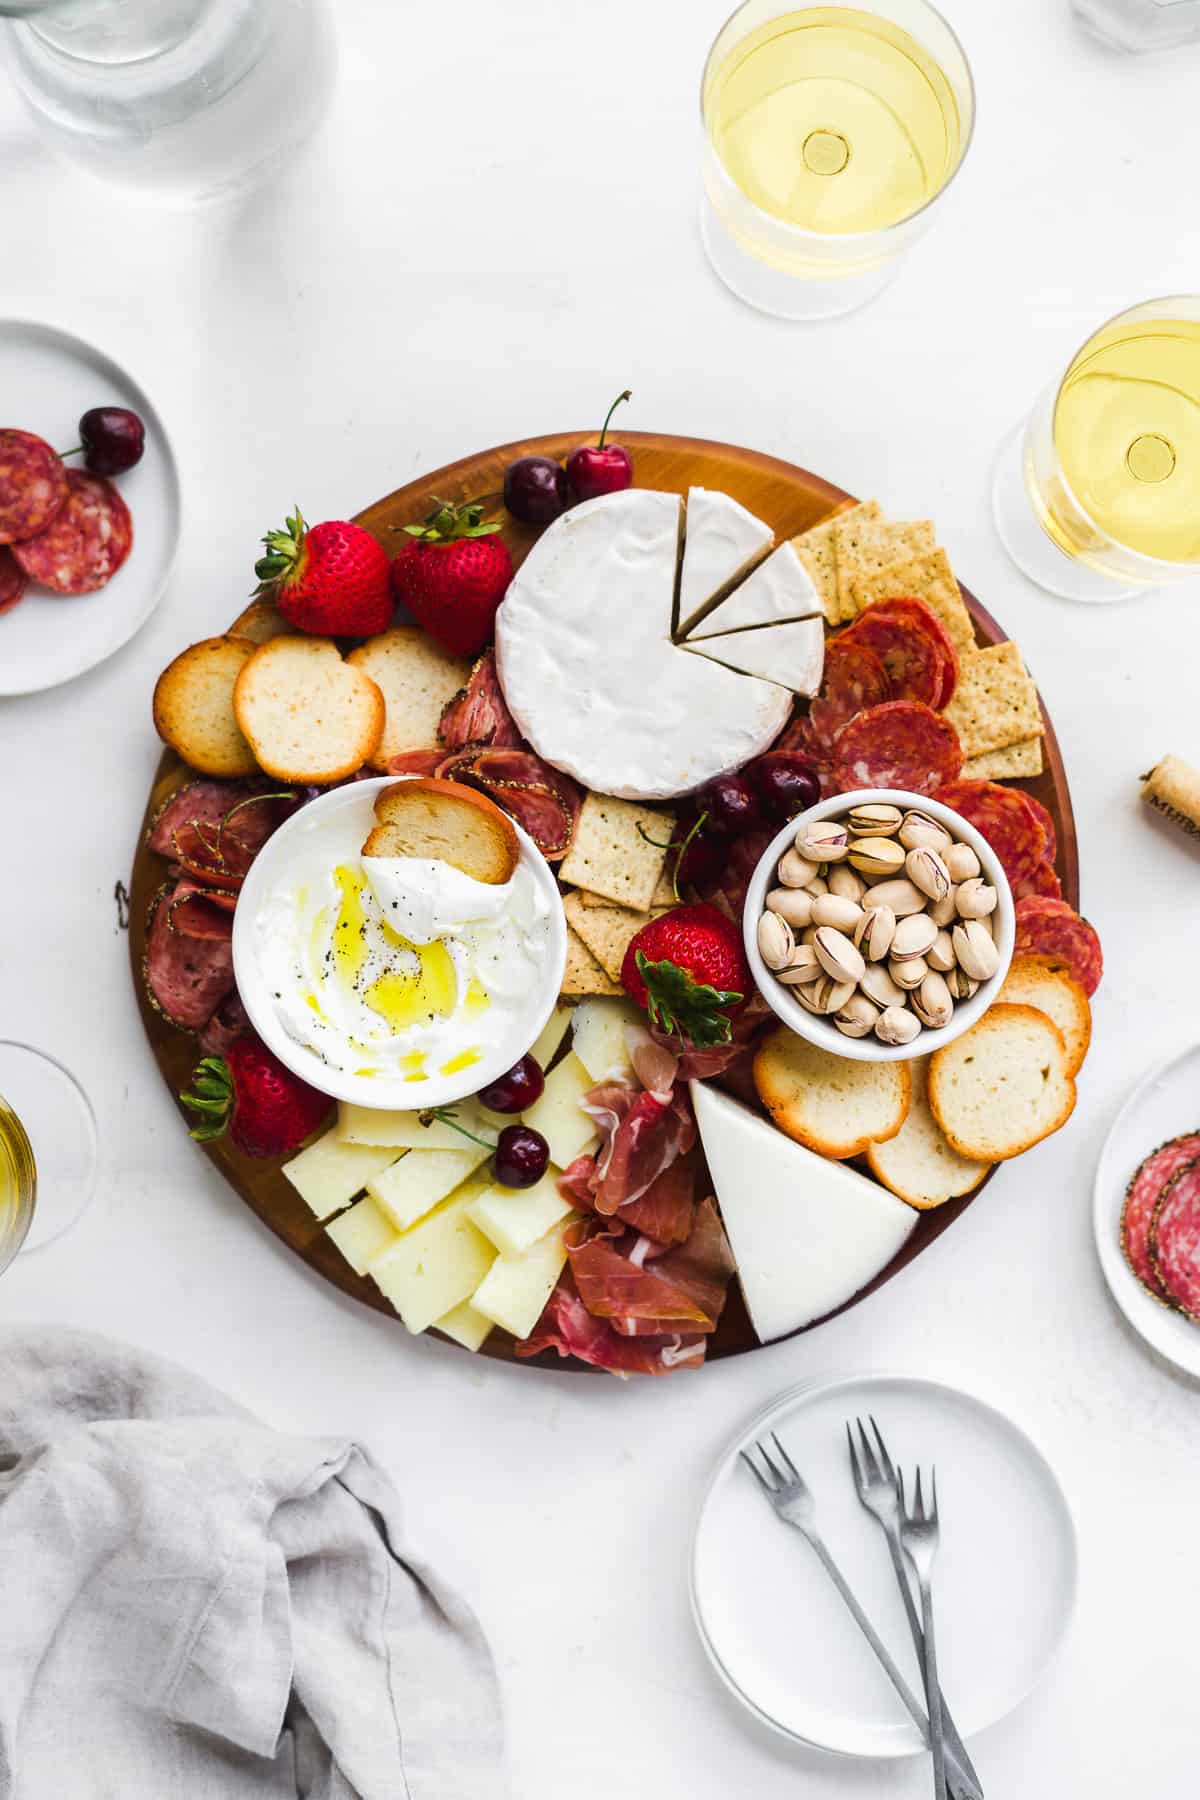 Charcuterie board with cheeses and fruit and wine on the side.